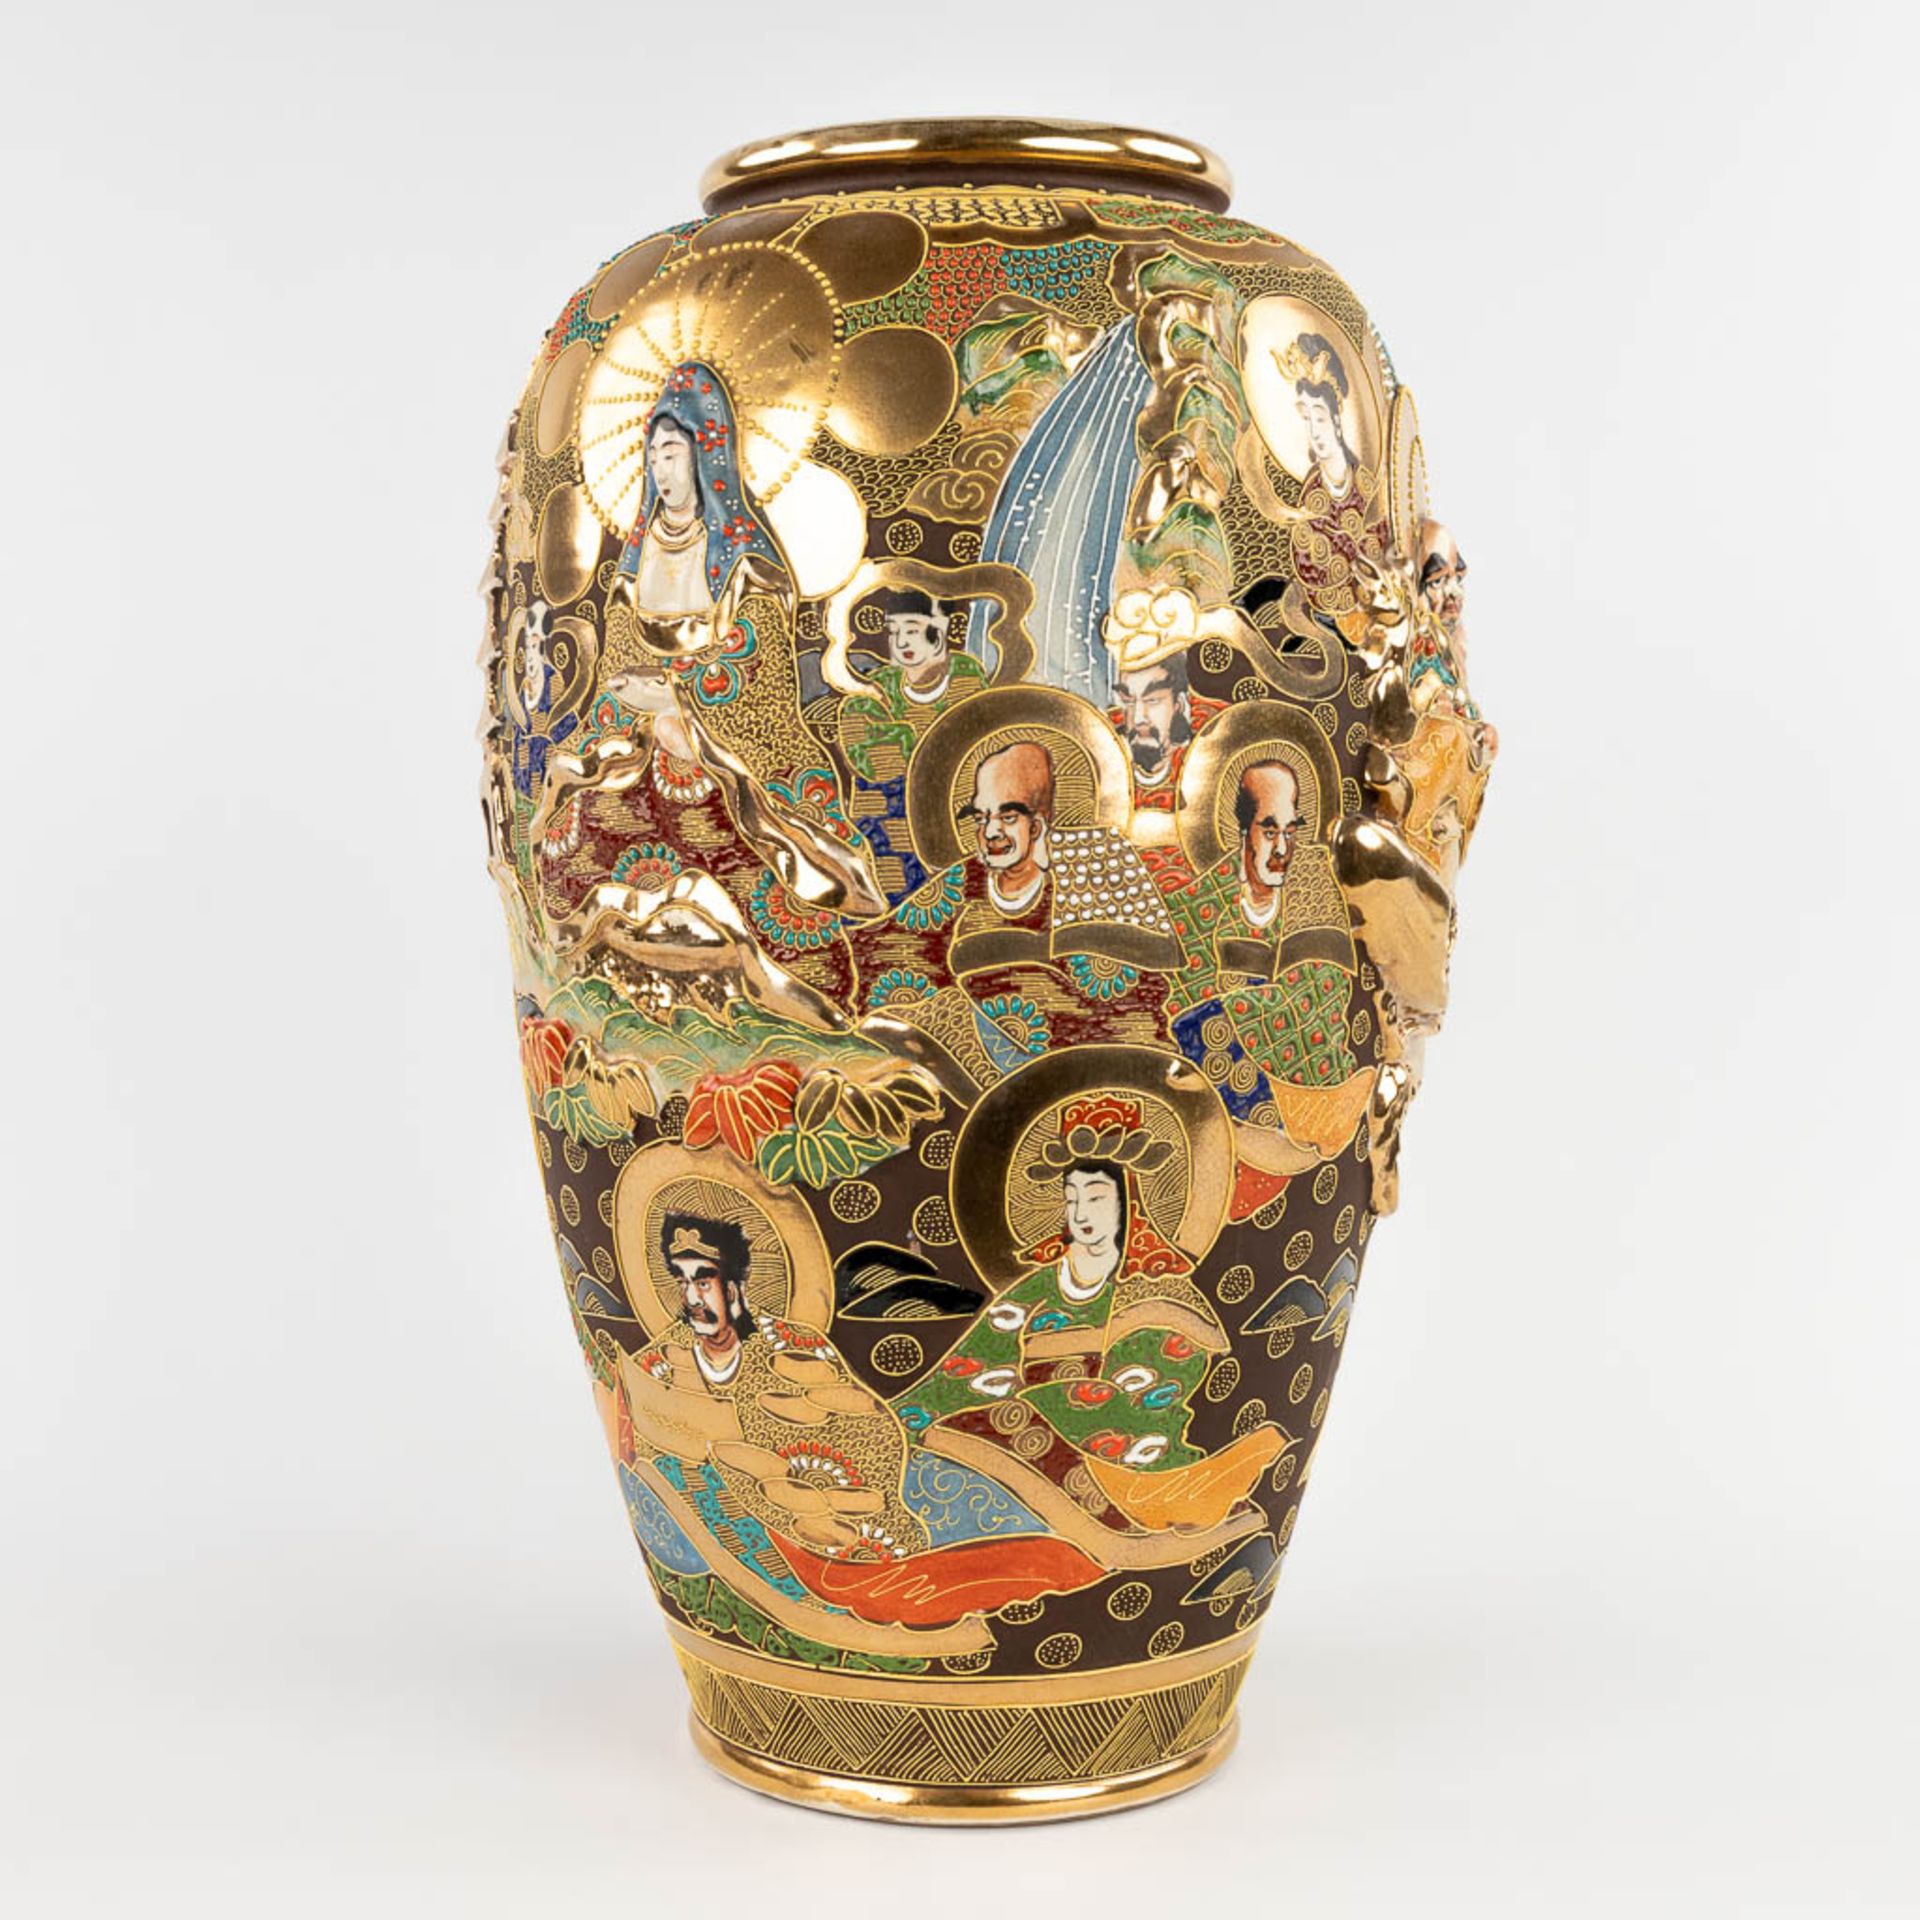 A large vase, Satsuma faience decorated with men and ladies, Japan. 20th C. (H:48 x D:28 cm) - Image 7 of 17